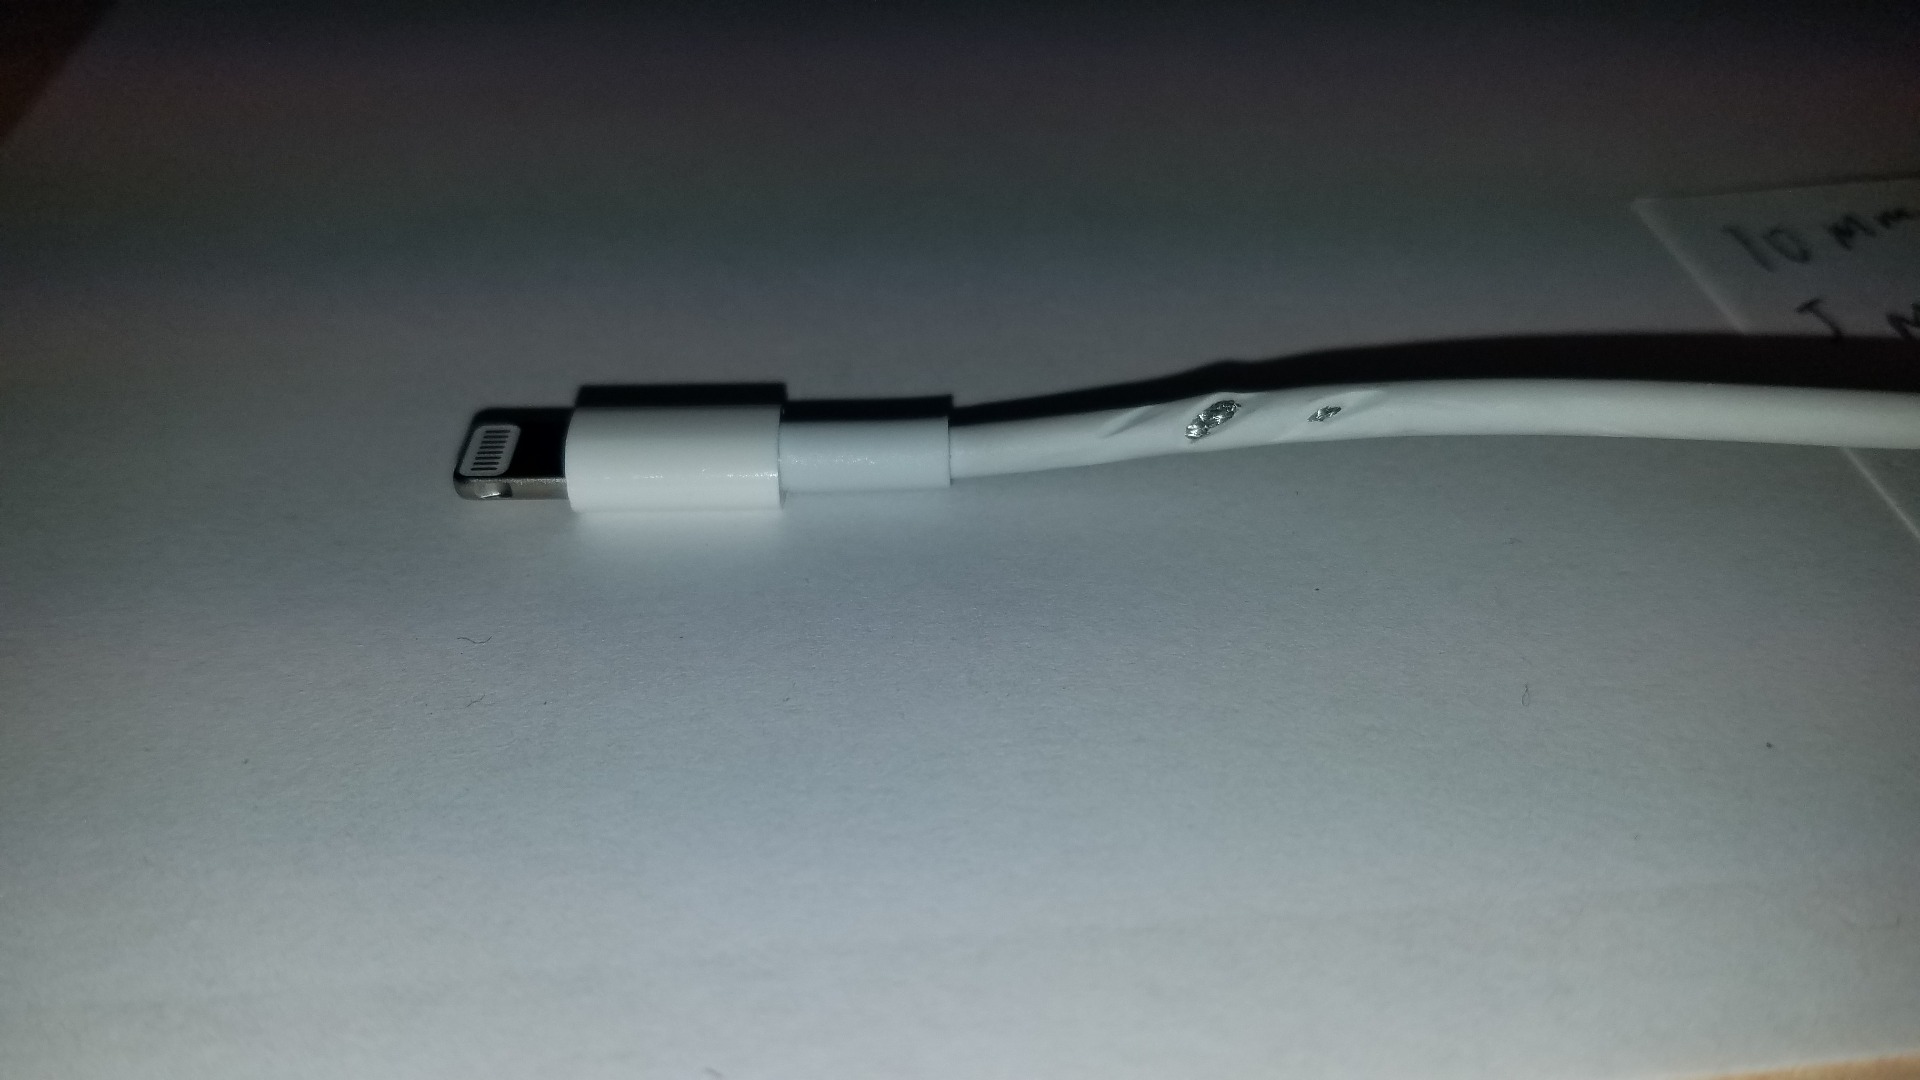 A broken iPhone charging cable that is about to be fixed using heat shrink tubing.